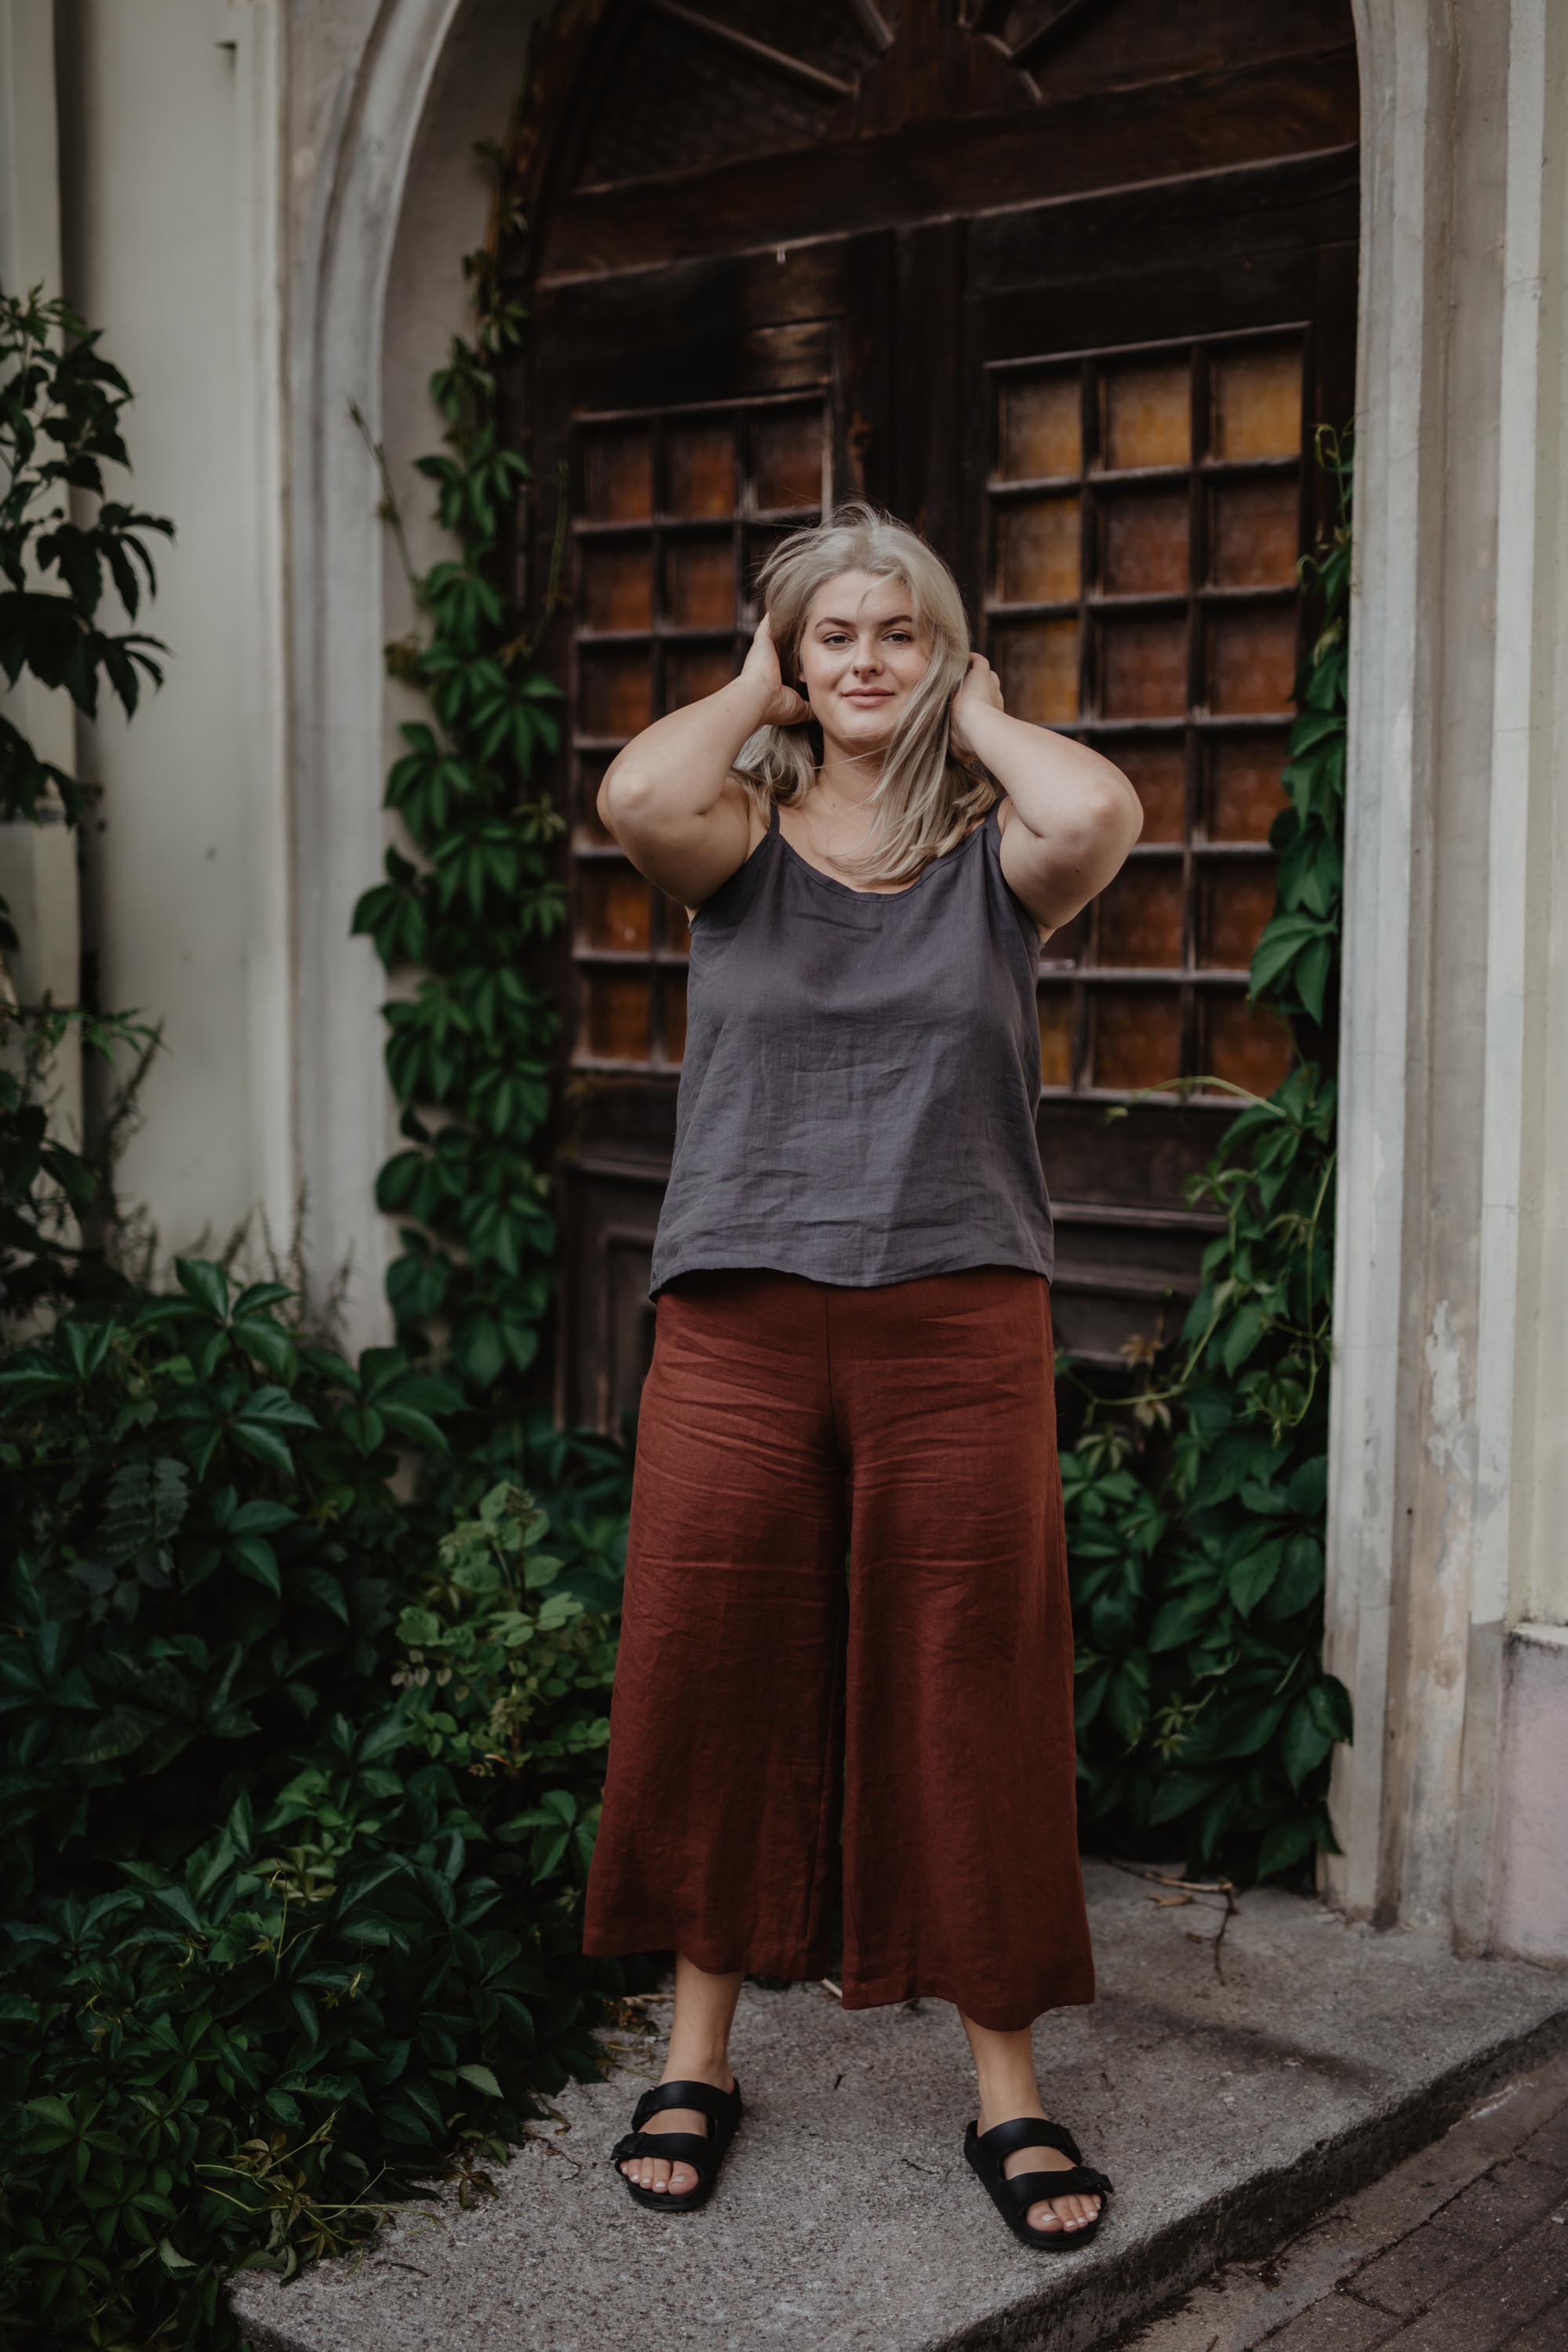 Woman Posing In Front Of a Botanical Door Wearing A Dark Linen Top And Teraccotta Linen Pants By Amourlinen